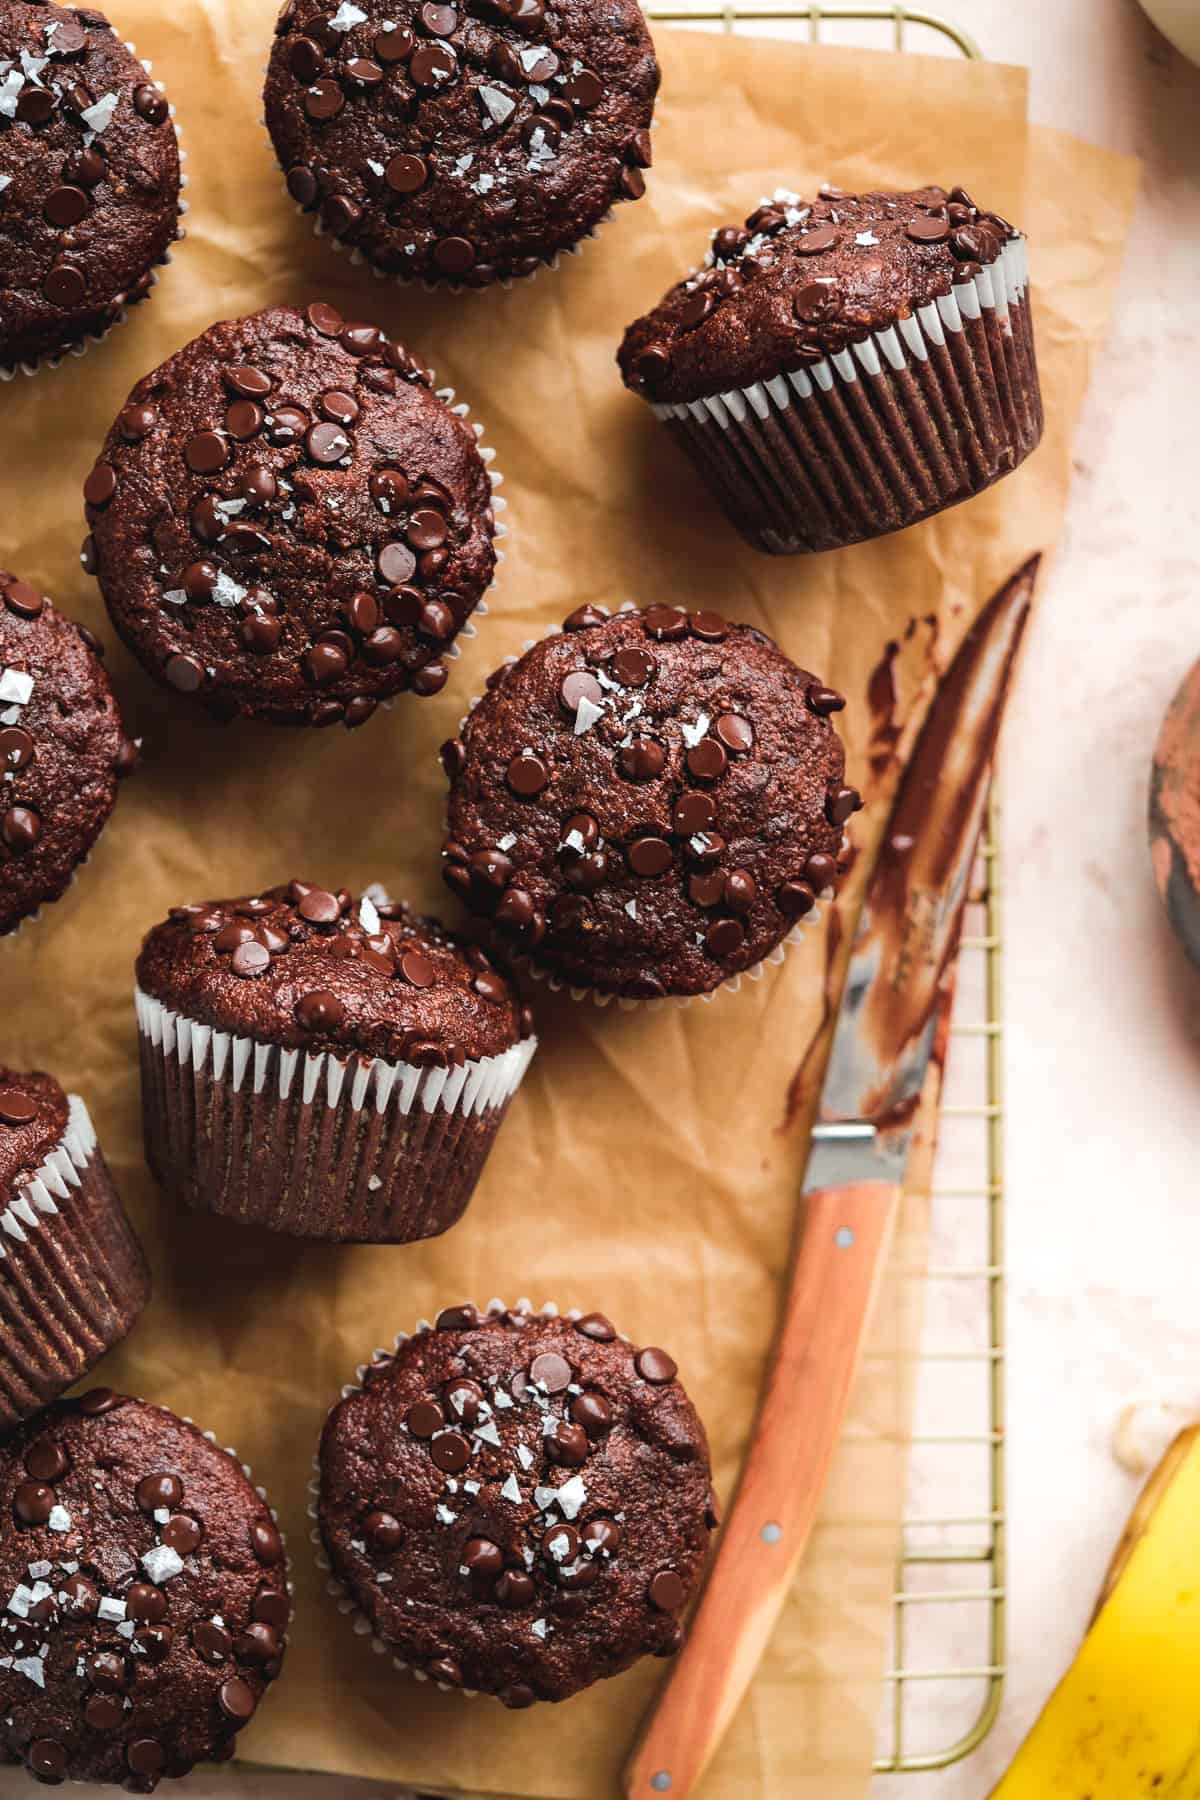 Chocolate muffins with liners scattered on brown paper.